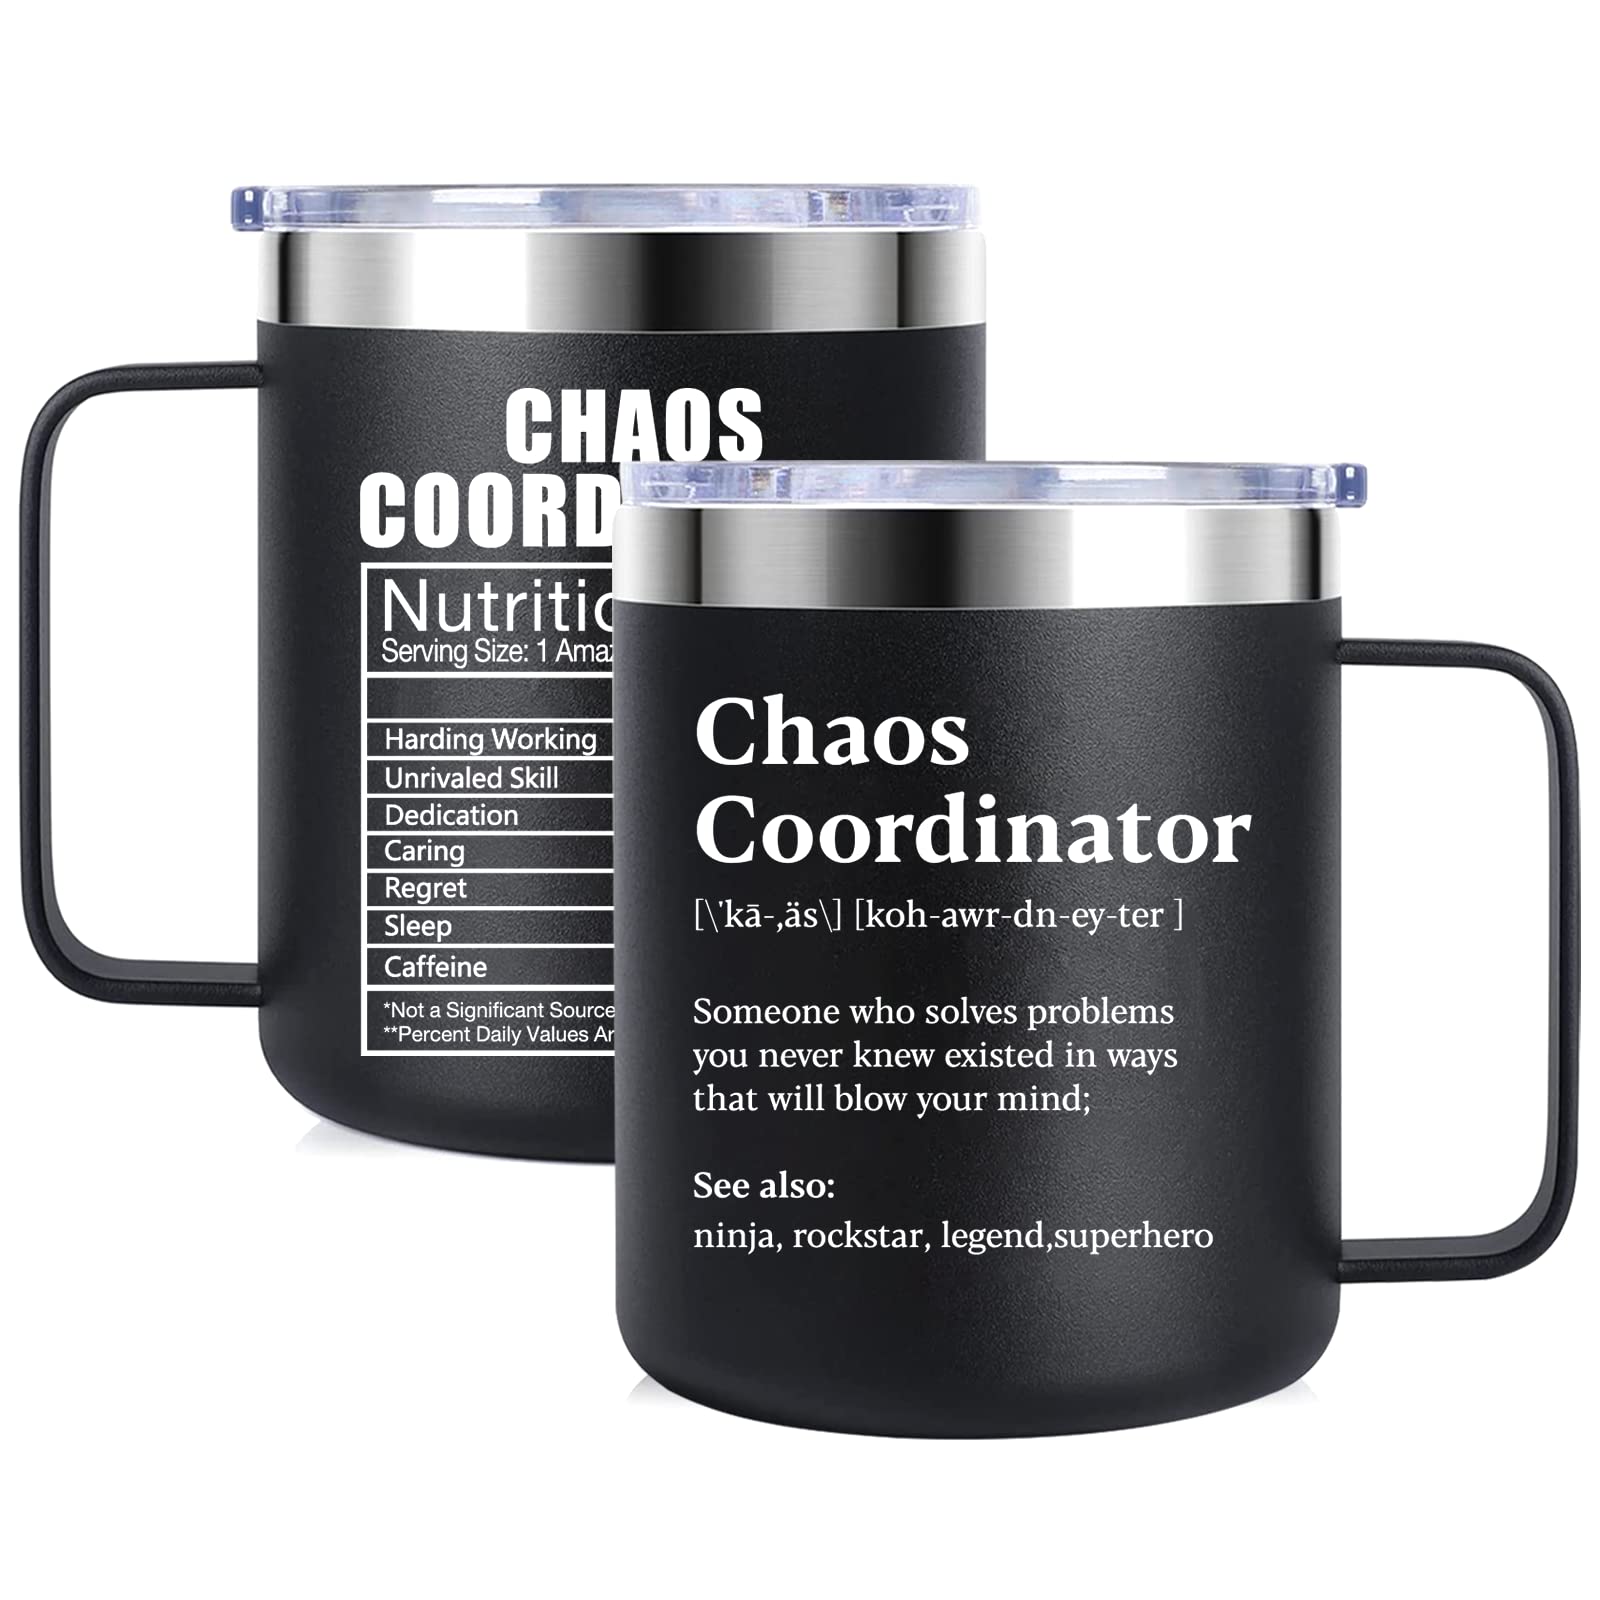 ZAHUOMUG Chaos Coordinator Gifts Mug,Thank You Gifts for Boss Teacher Men,Appreciation Gifts for Manager,Leader,Gifts for Male Friend Coworker,Boss Day Gifts,Chaos Coordinator Tumbler,Office Mug 12oz